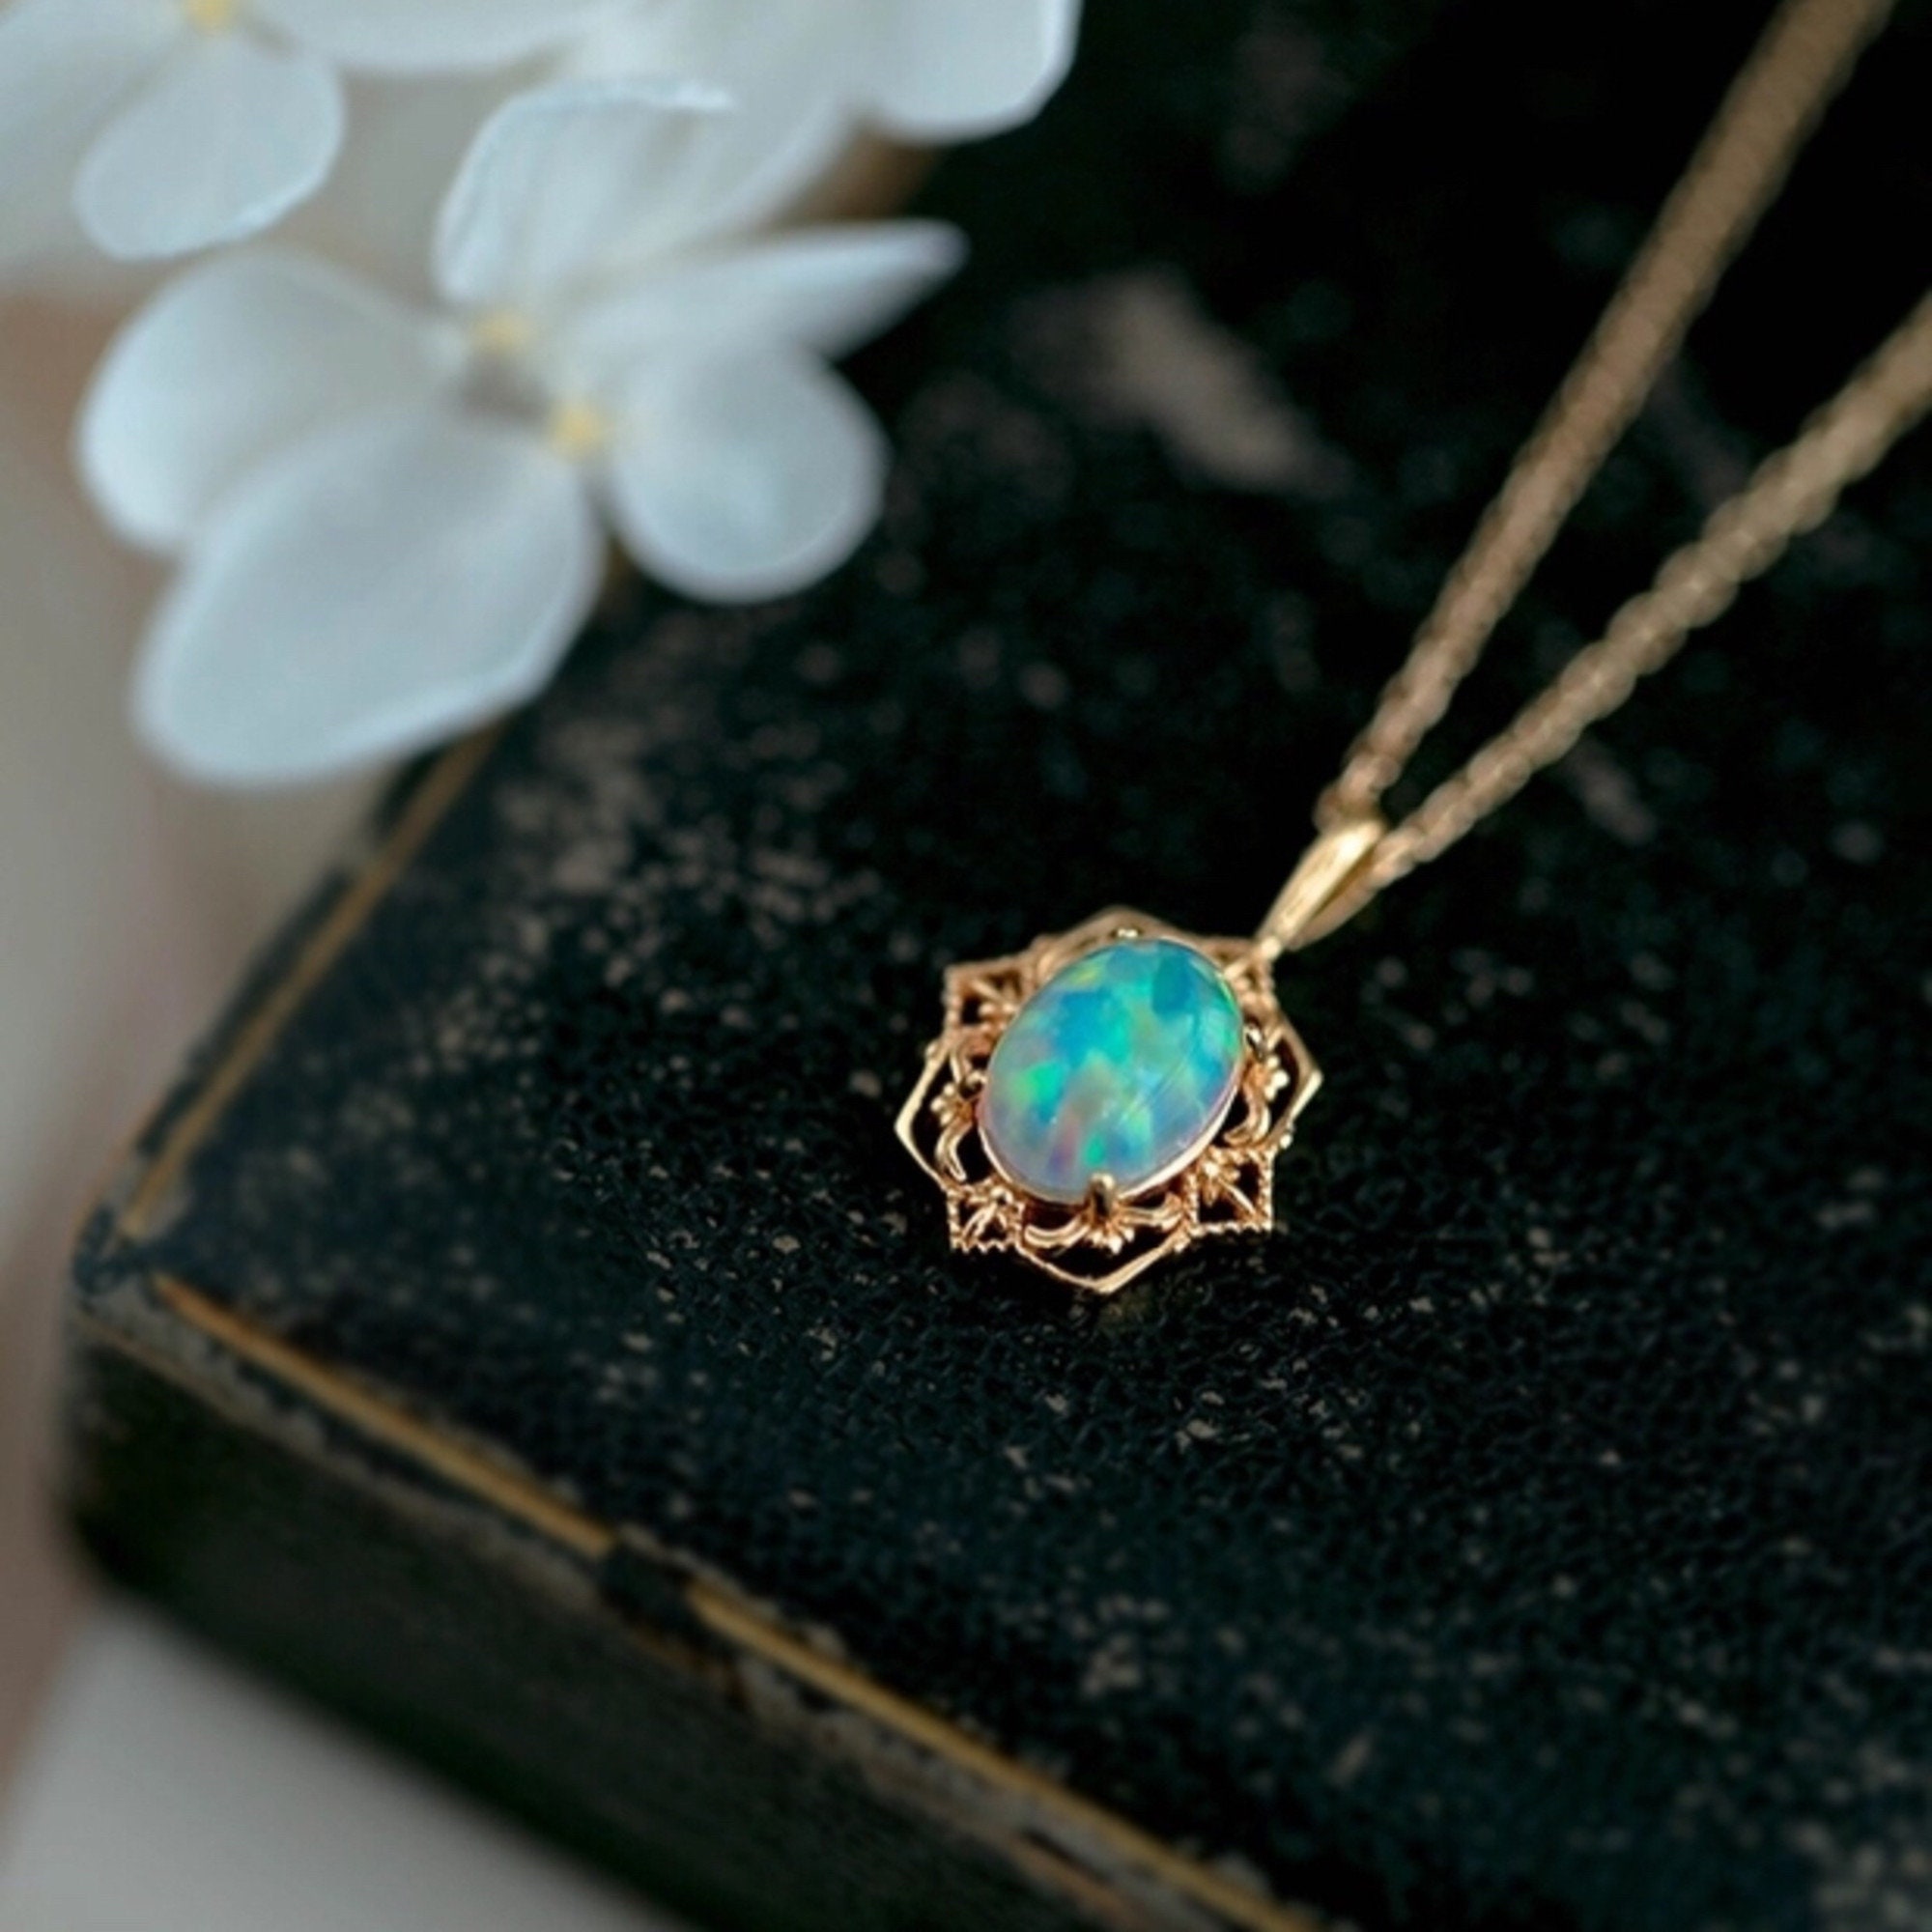 Buy Natural Opal Pendant Necklace Online in India - Mypoojabox.in